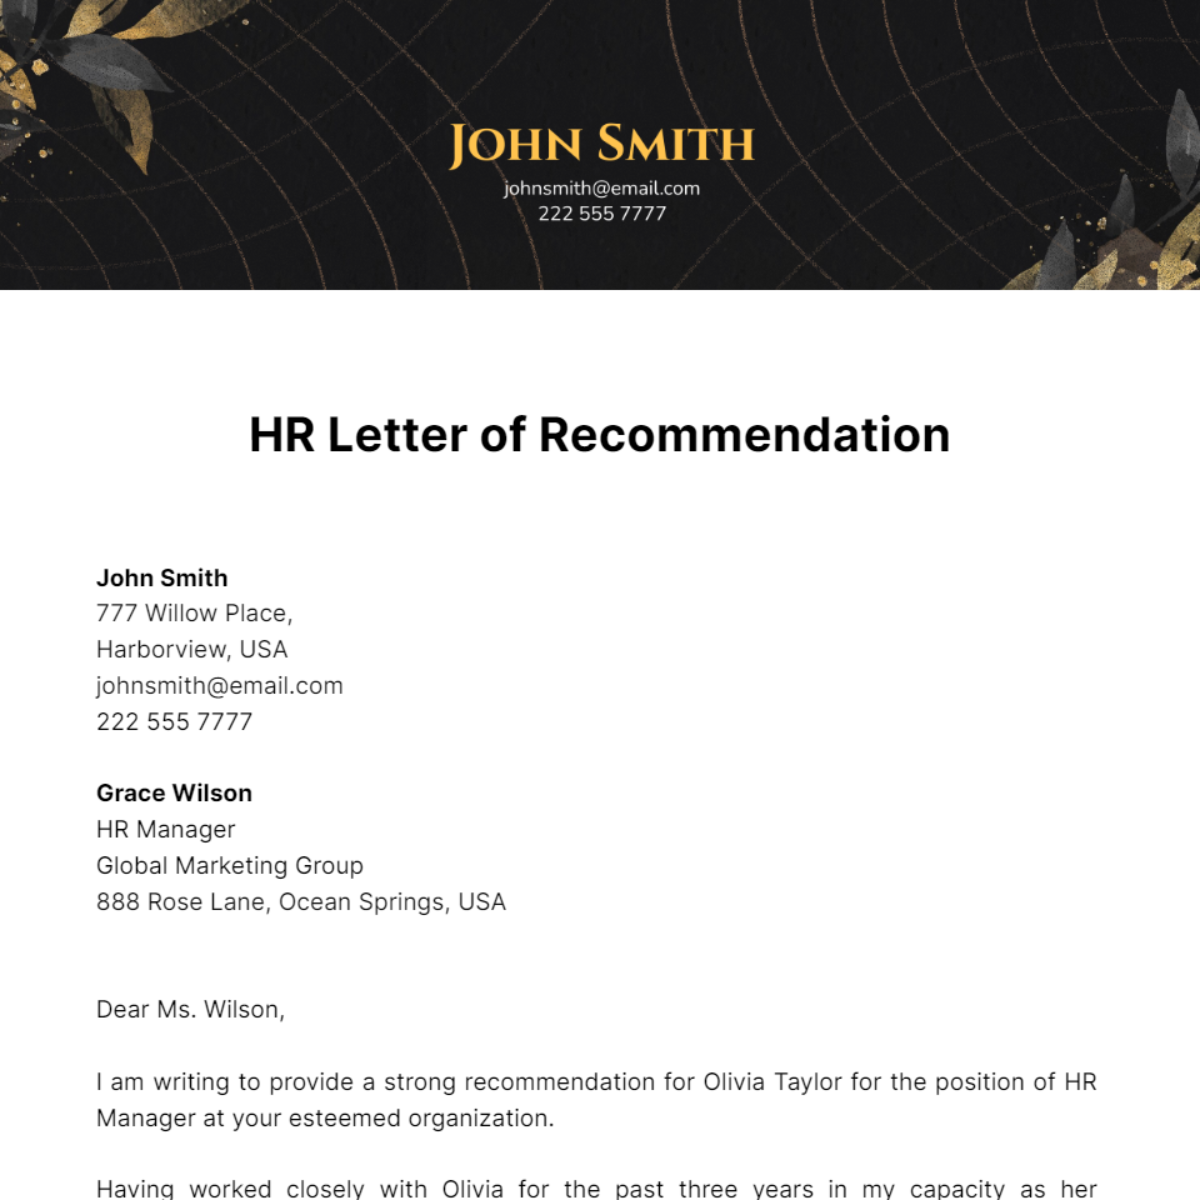 HR Letter of Recommendation Template